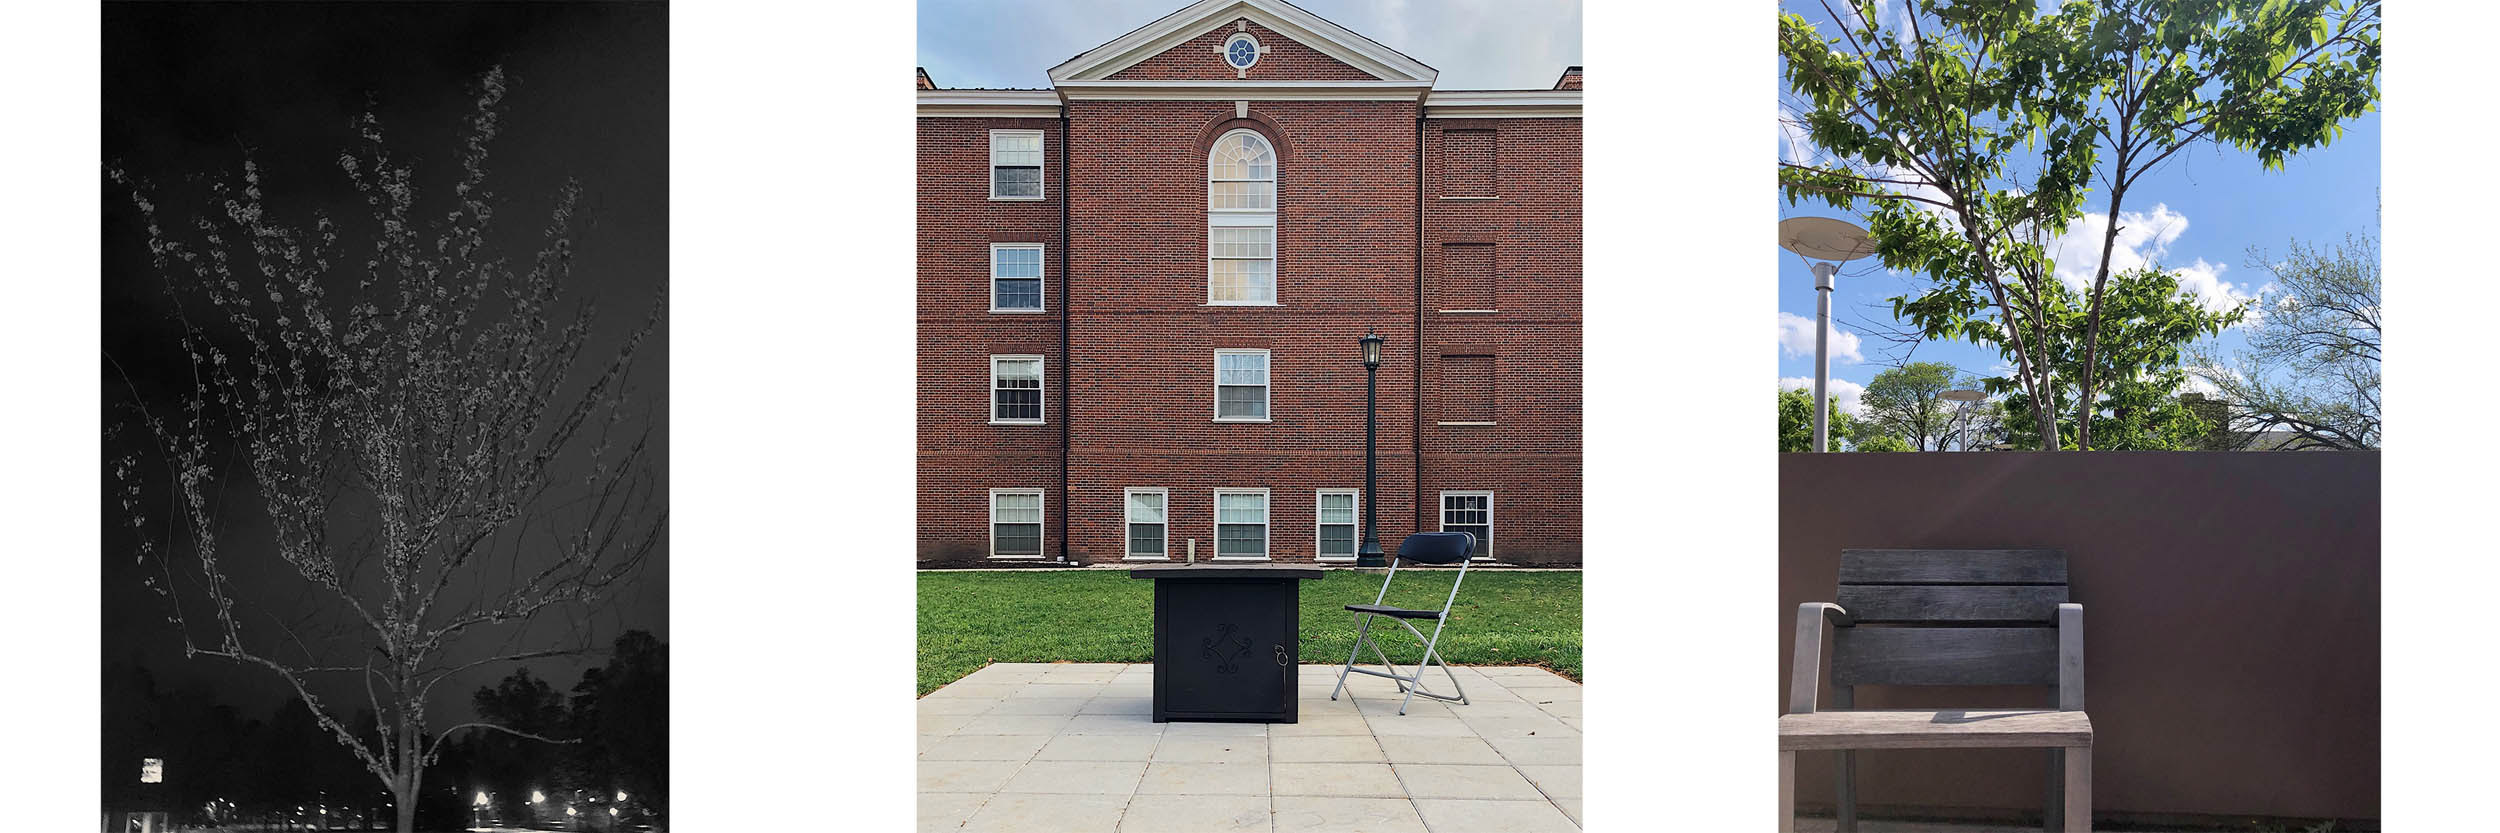 Empty table and chair siting on a patio square in front of a brick building